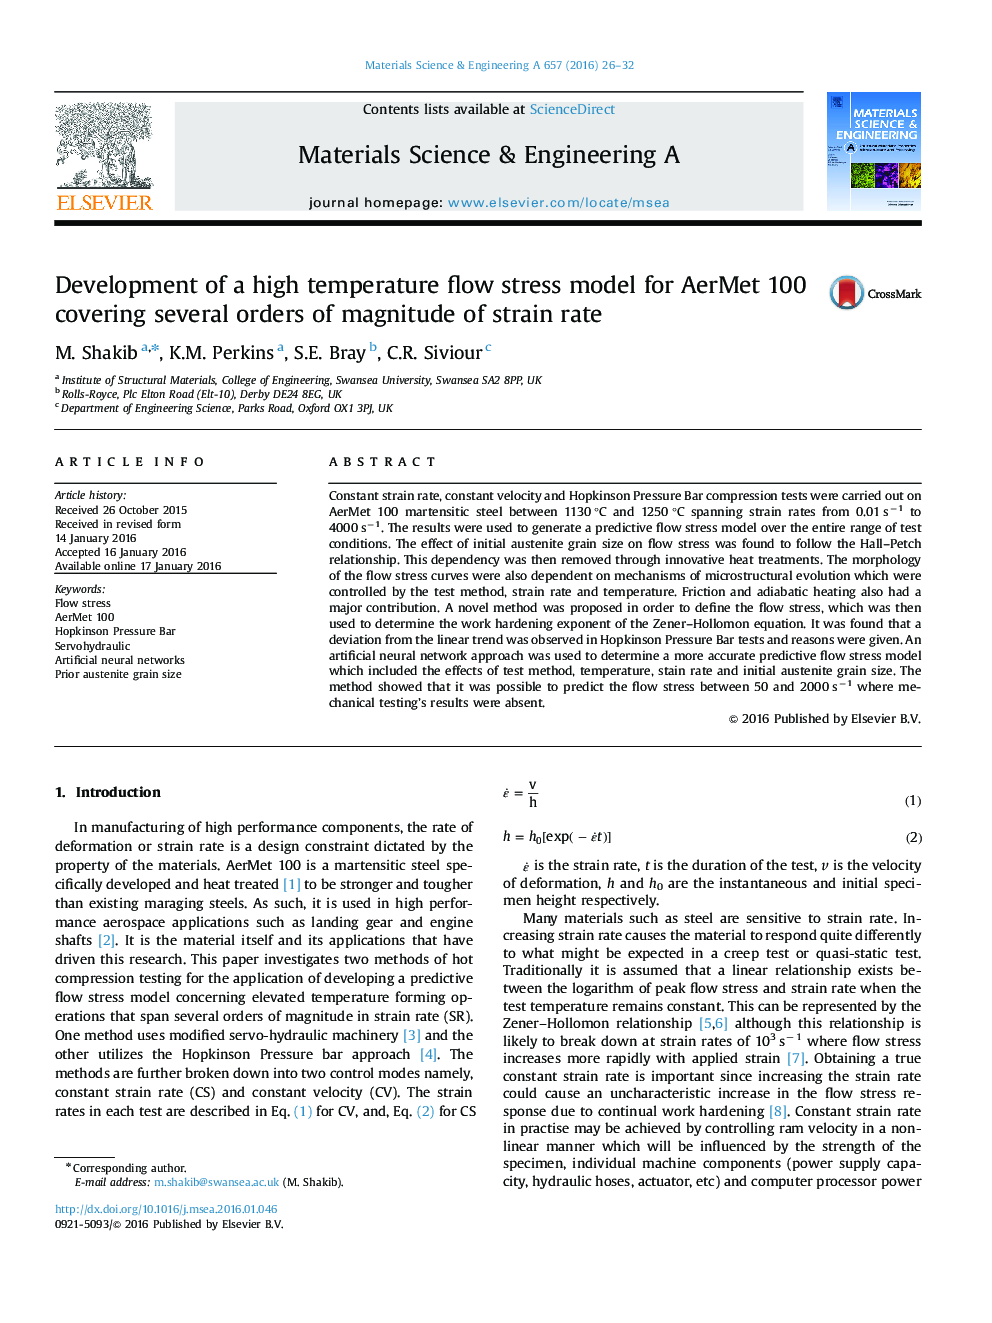 Development of a high temperature flow stress model for AerMet 100 covering several orders of magnitude of strain rate